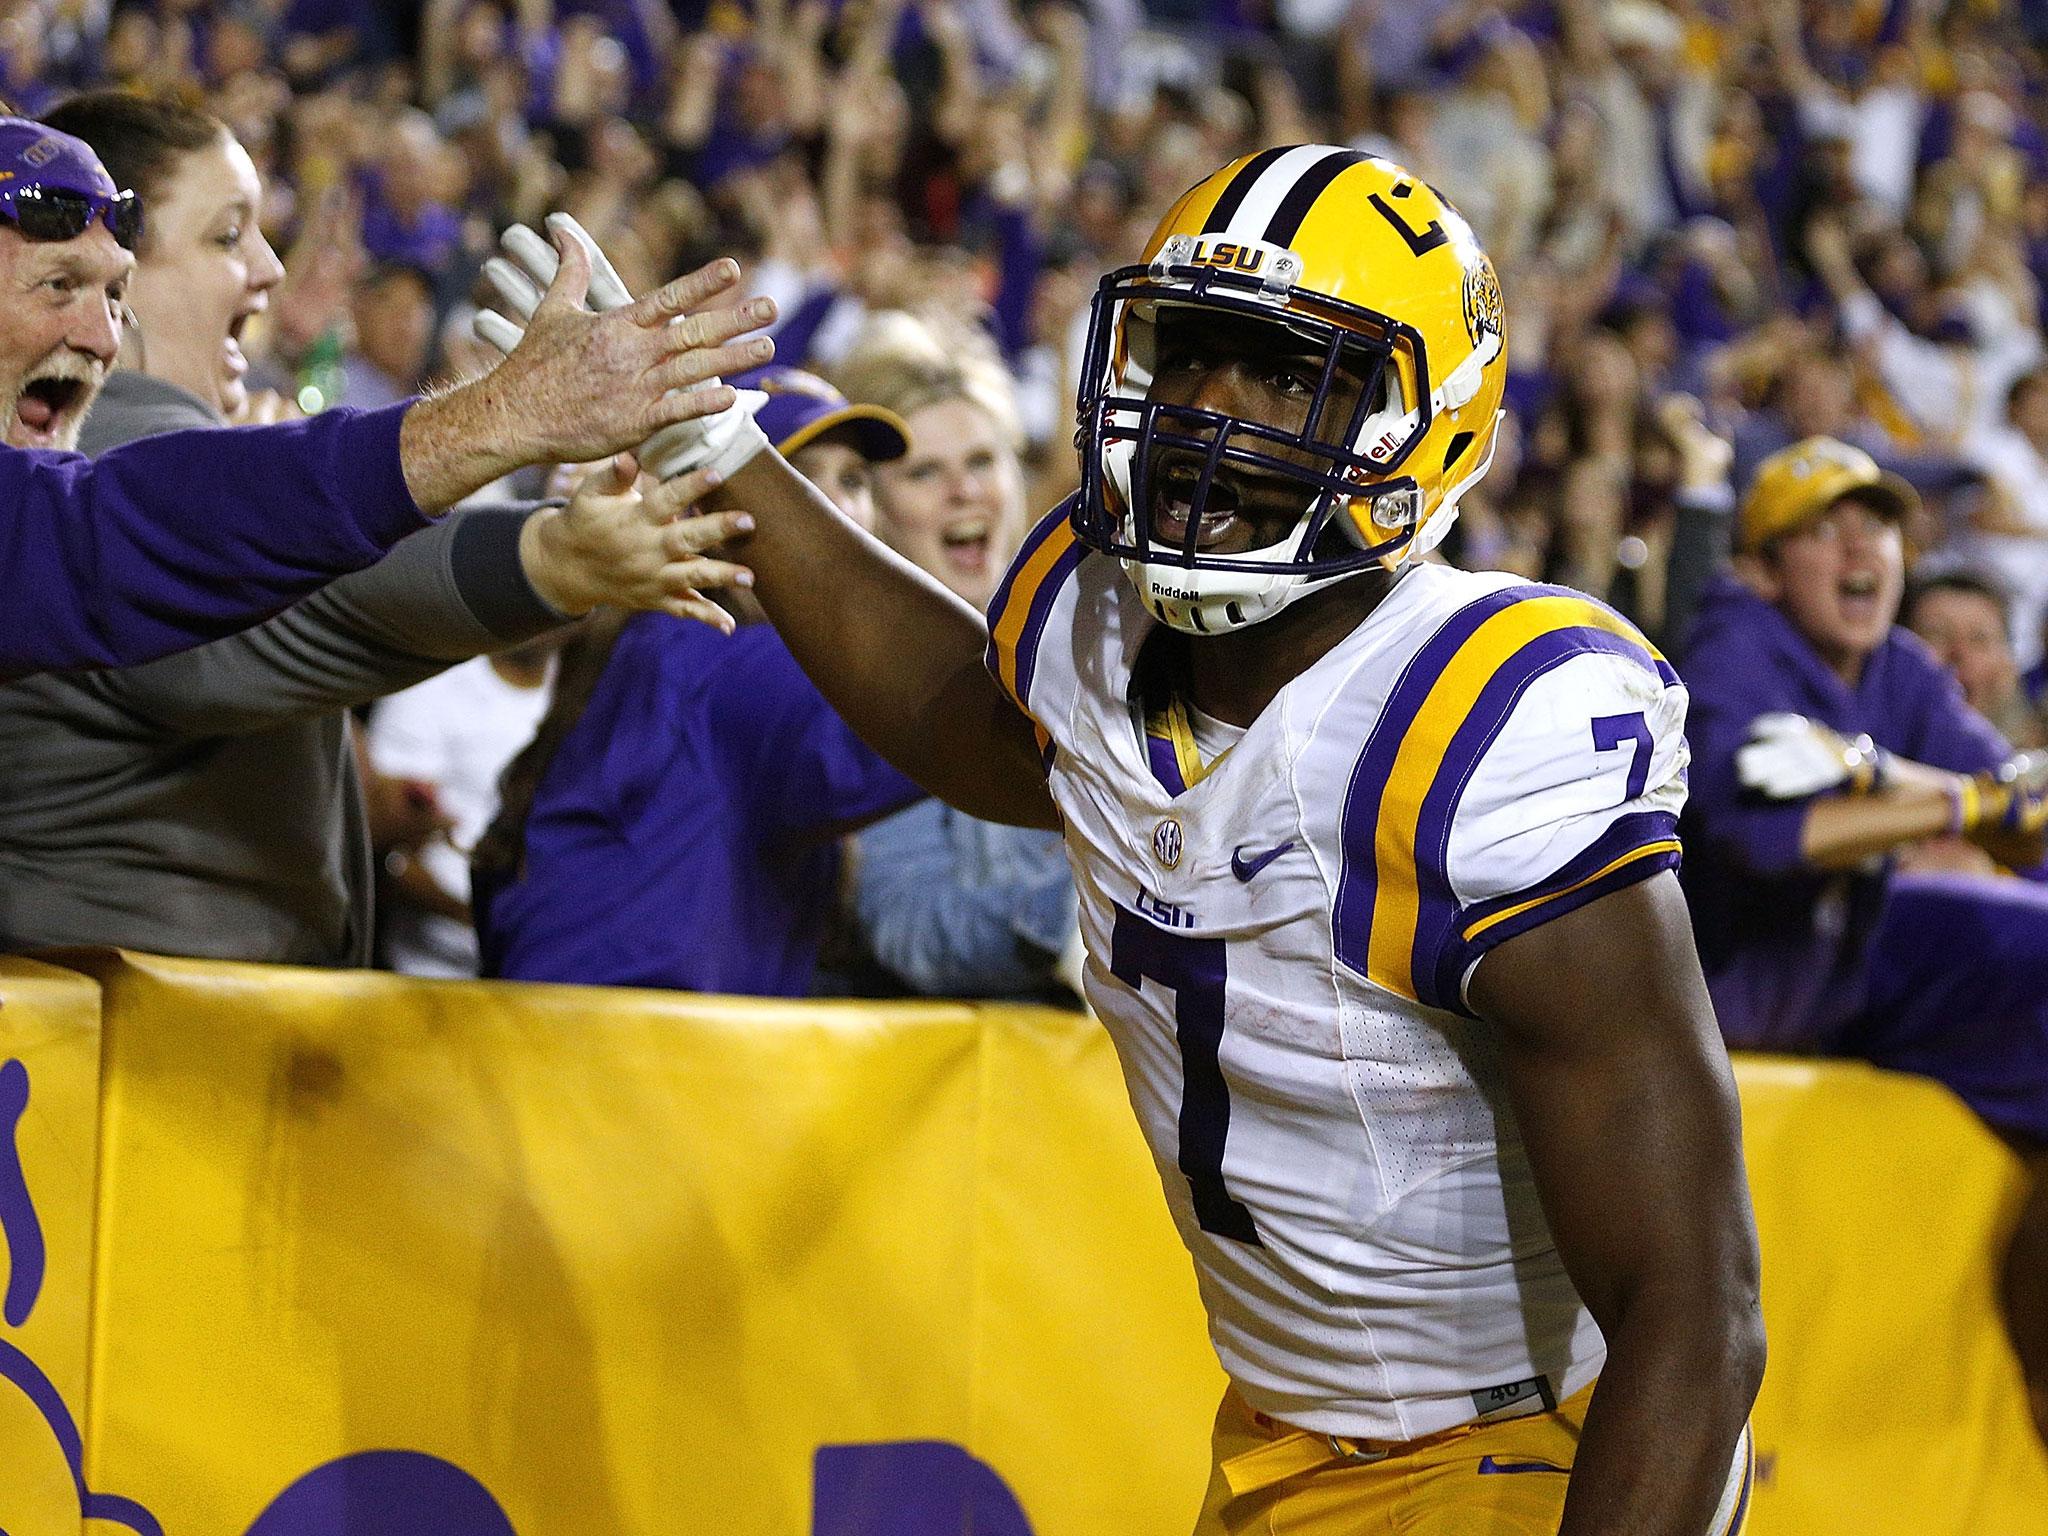 &#13;
Fournette is projected as a top-10 pick &#13;